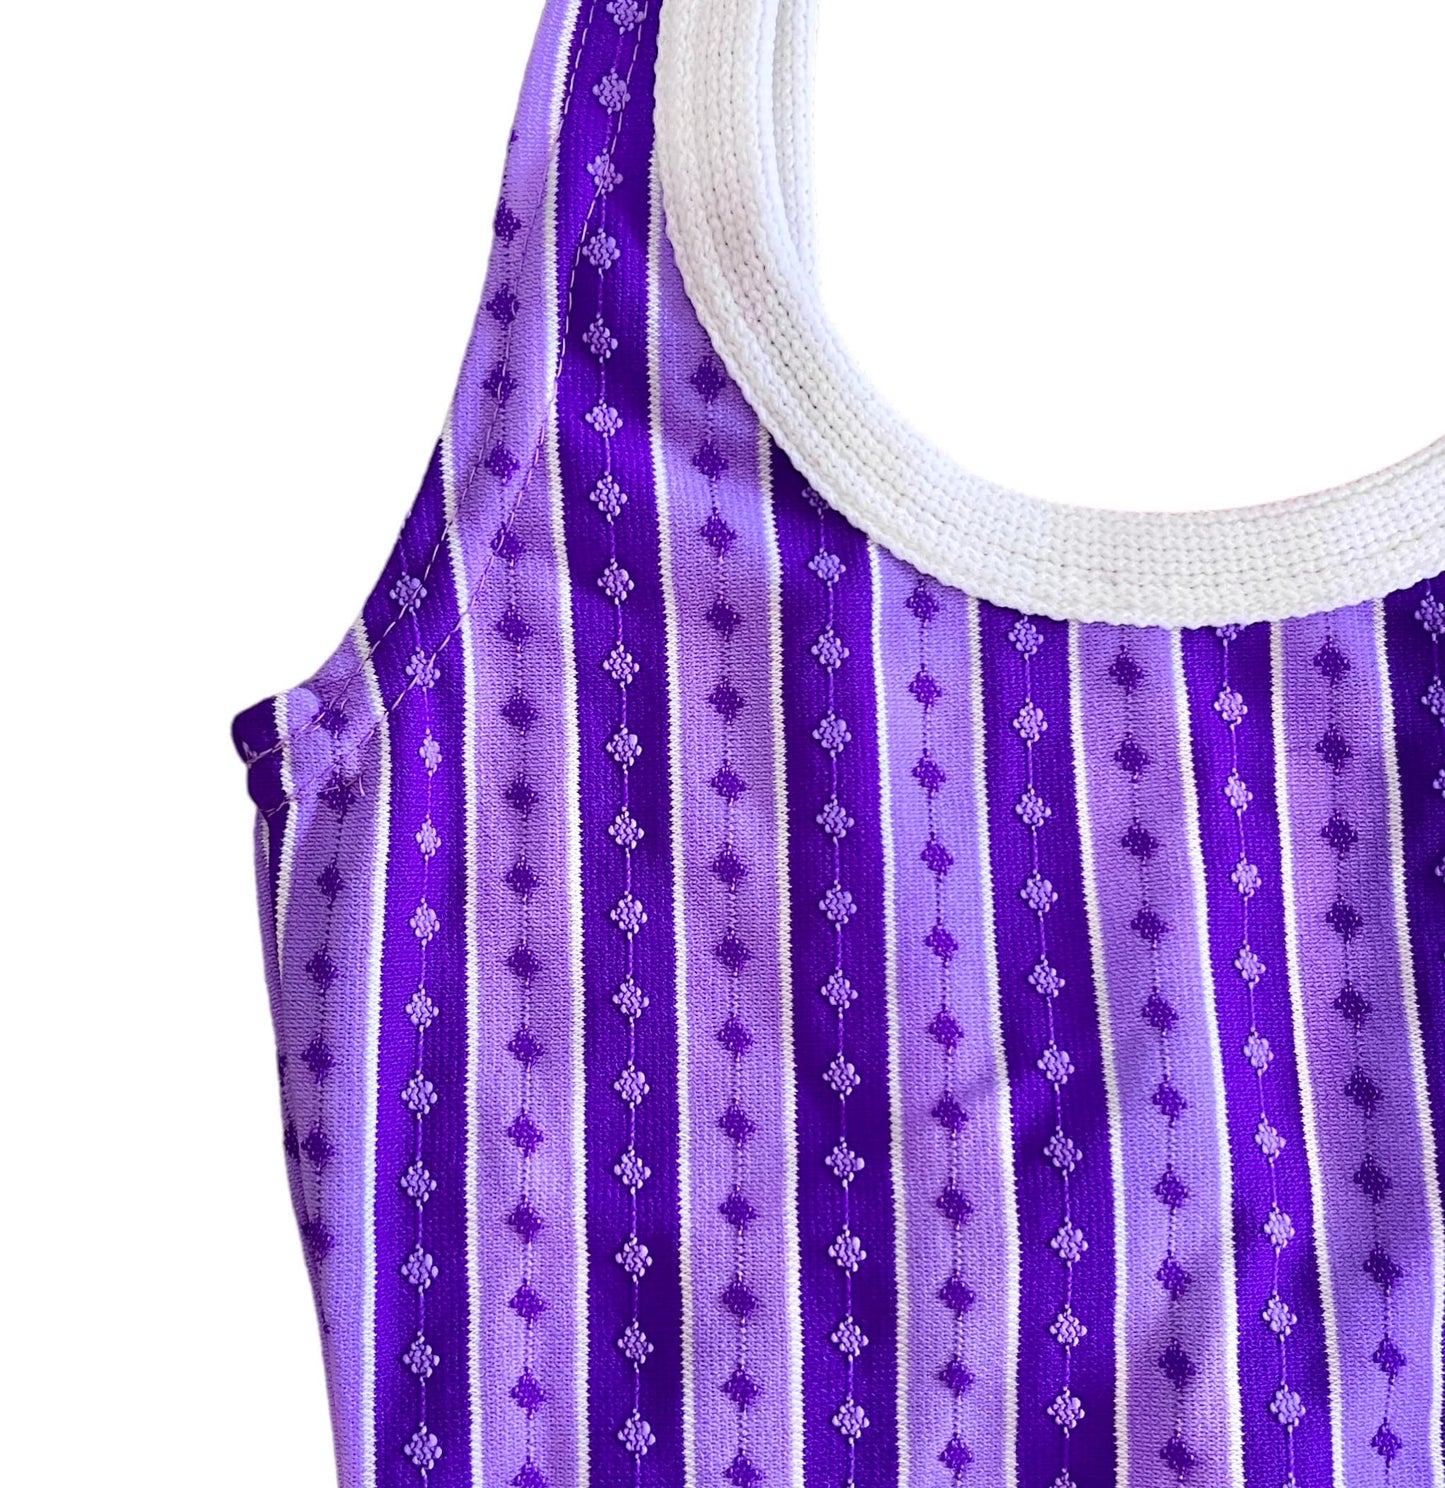 70's Purple Swimming Suit / 6-8Y and 10-12Y